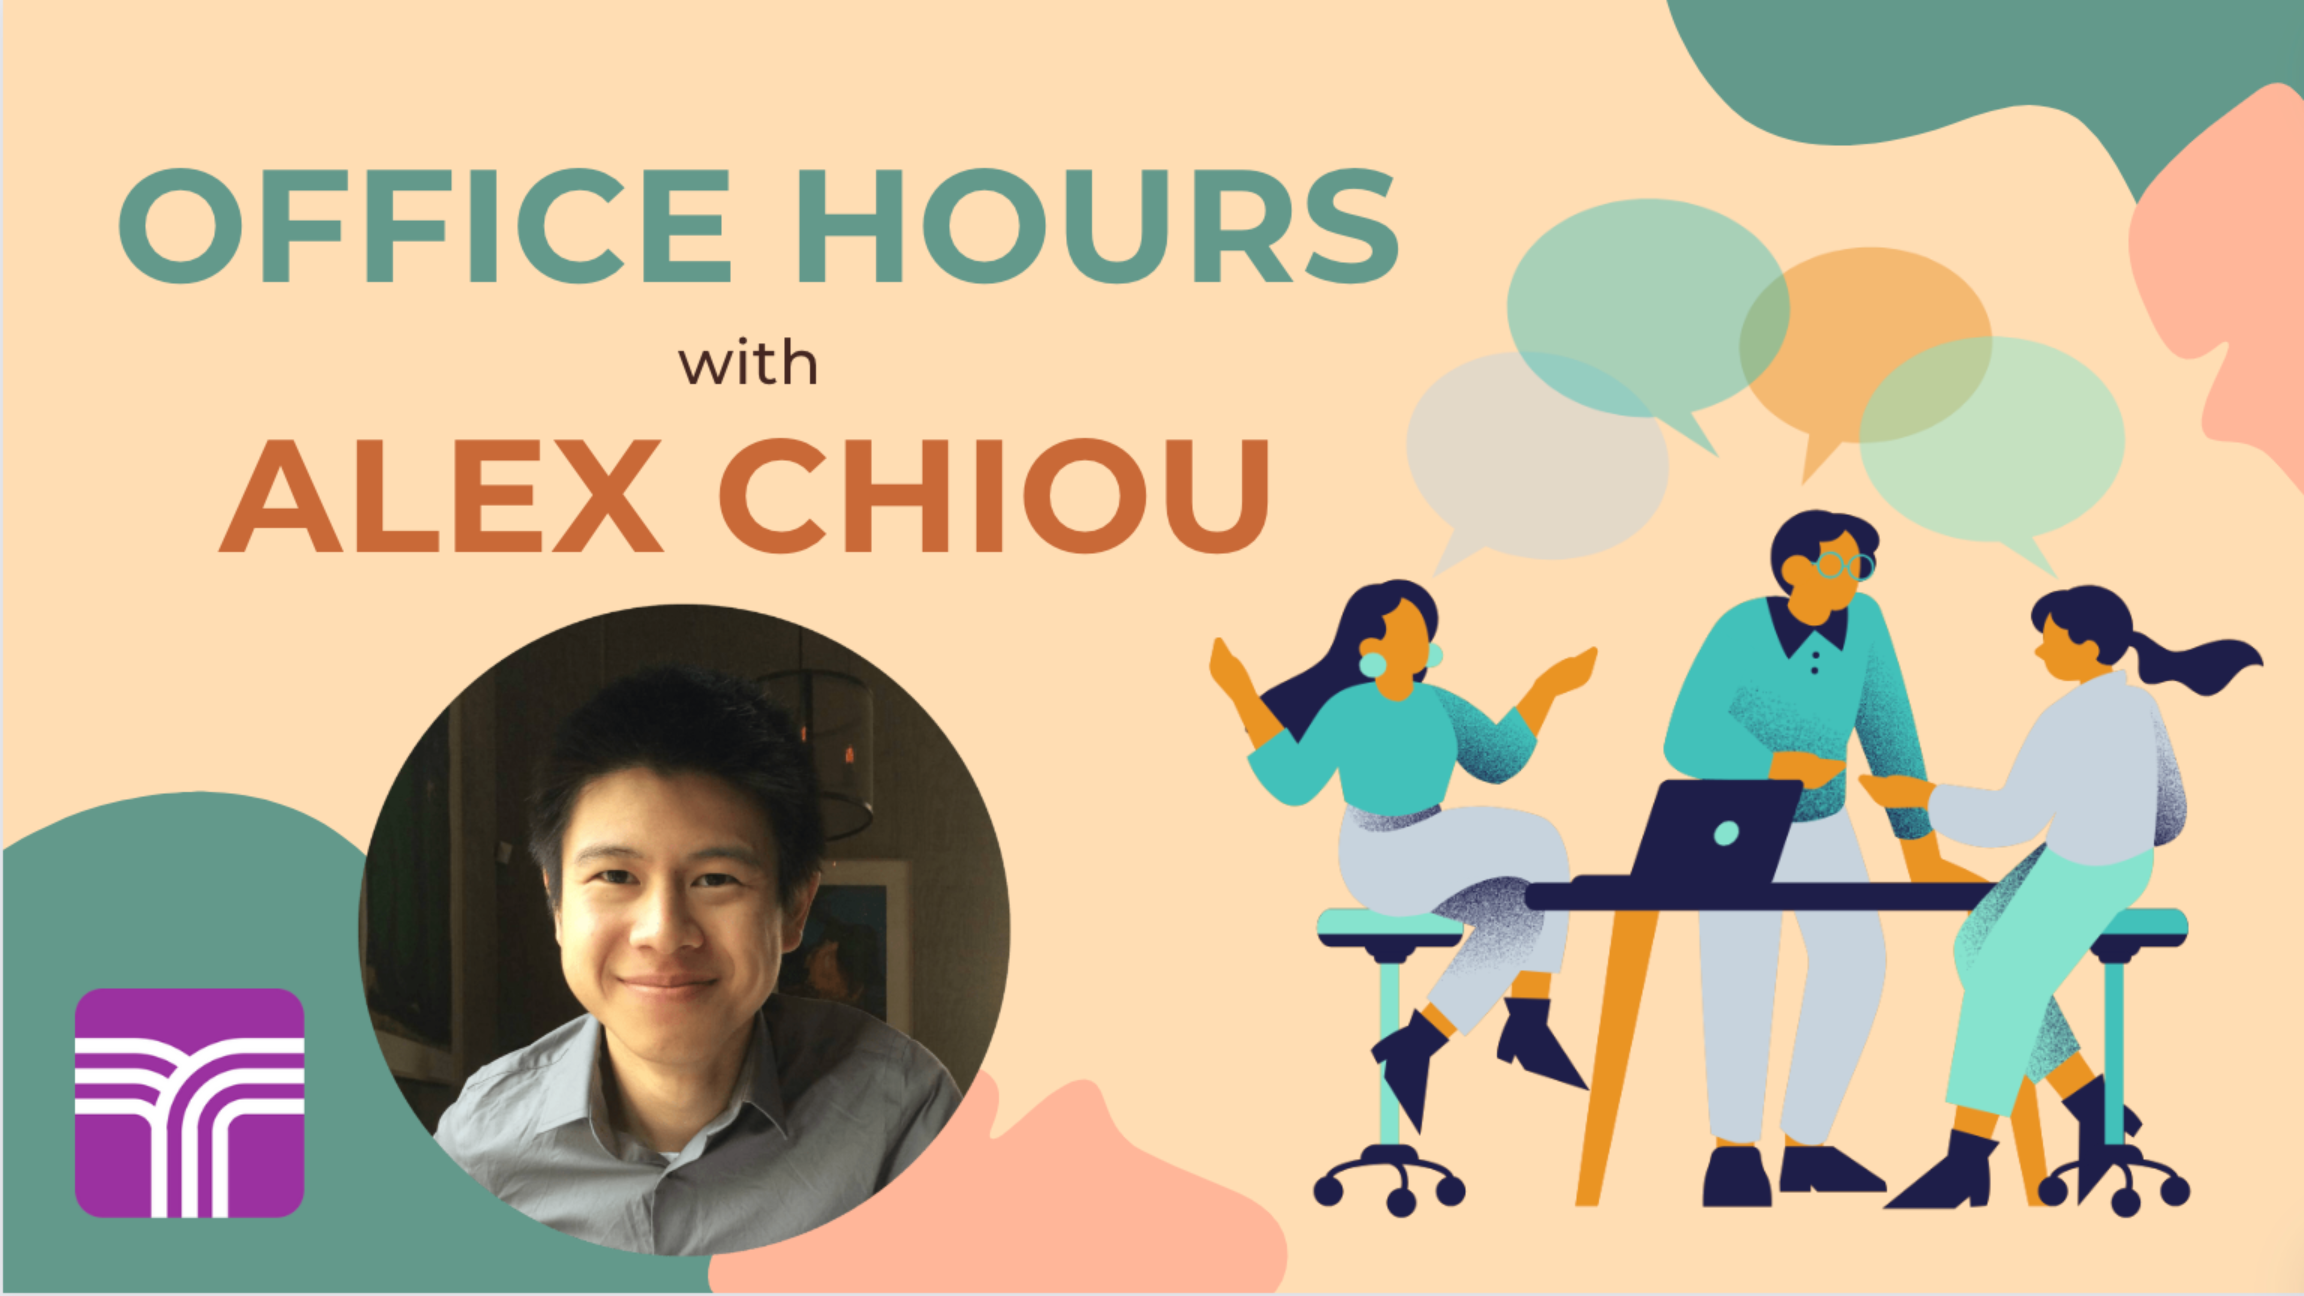 Group Office Hours With Alex - Get Personalized Career Advice Privately event